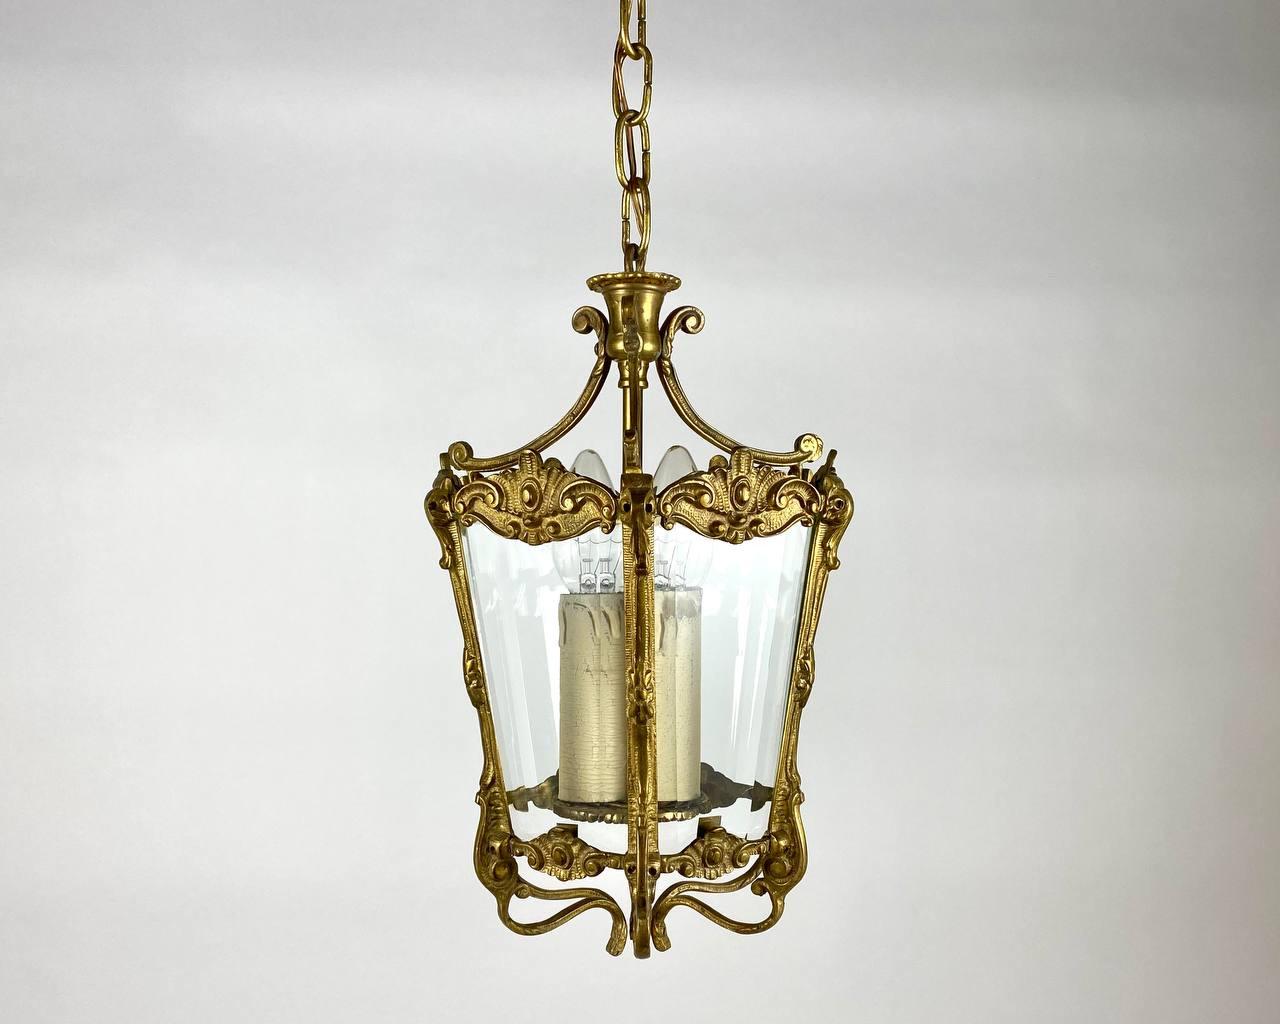 Rare Antique Ceiling Lantern in Gilt Bronze with Glass Panels, 1930s For Sale 6